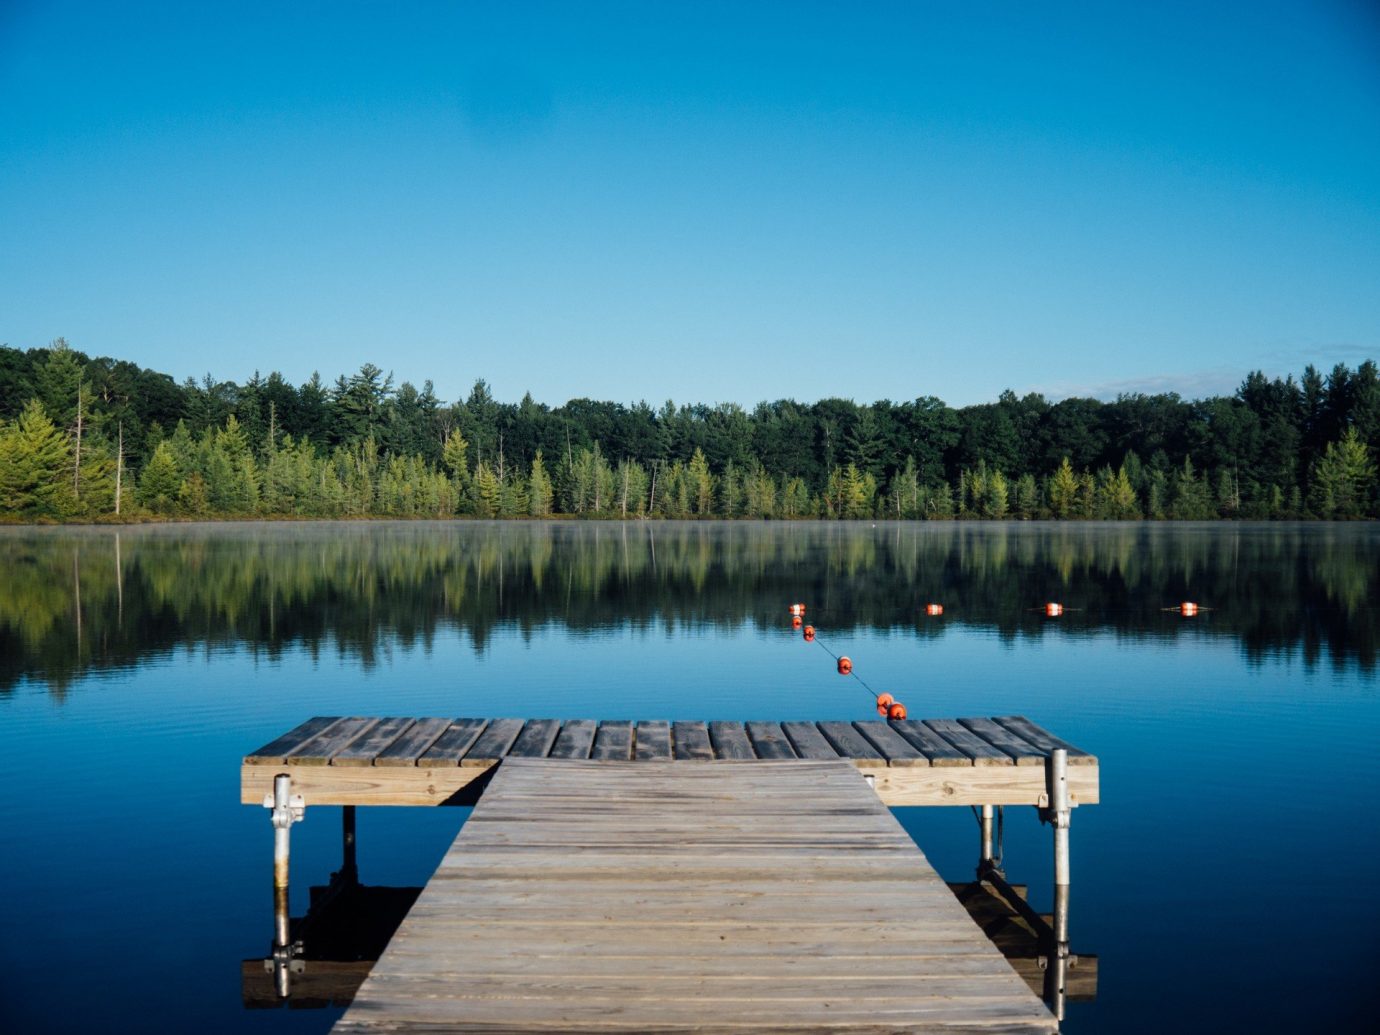 calm dock fresh Greenery isolation Lake Nature Outdoors reflection remote Scenic views serene trees Trip Ideas water tree outdoor sky body of water swimming pool reservoir dusk Sea wood surrounded day